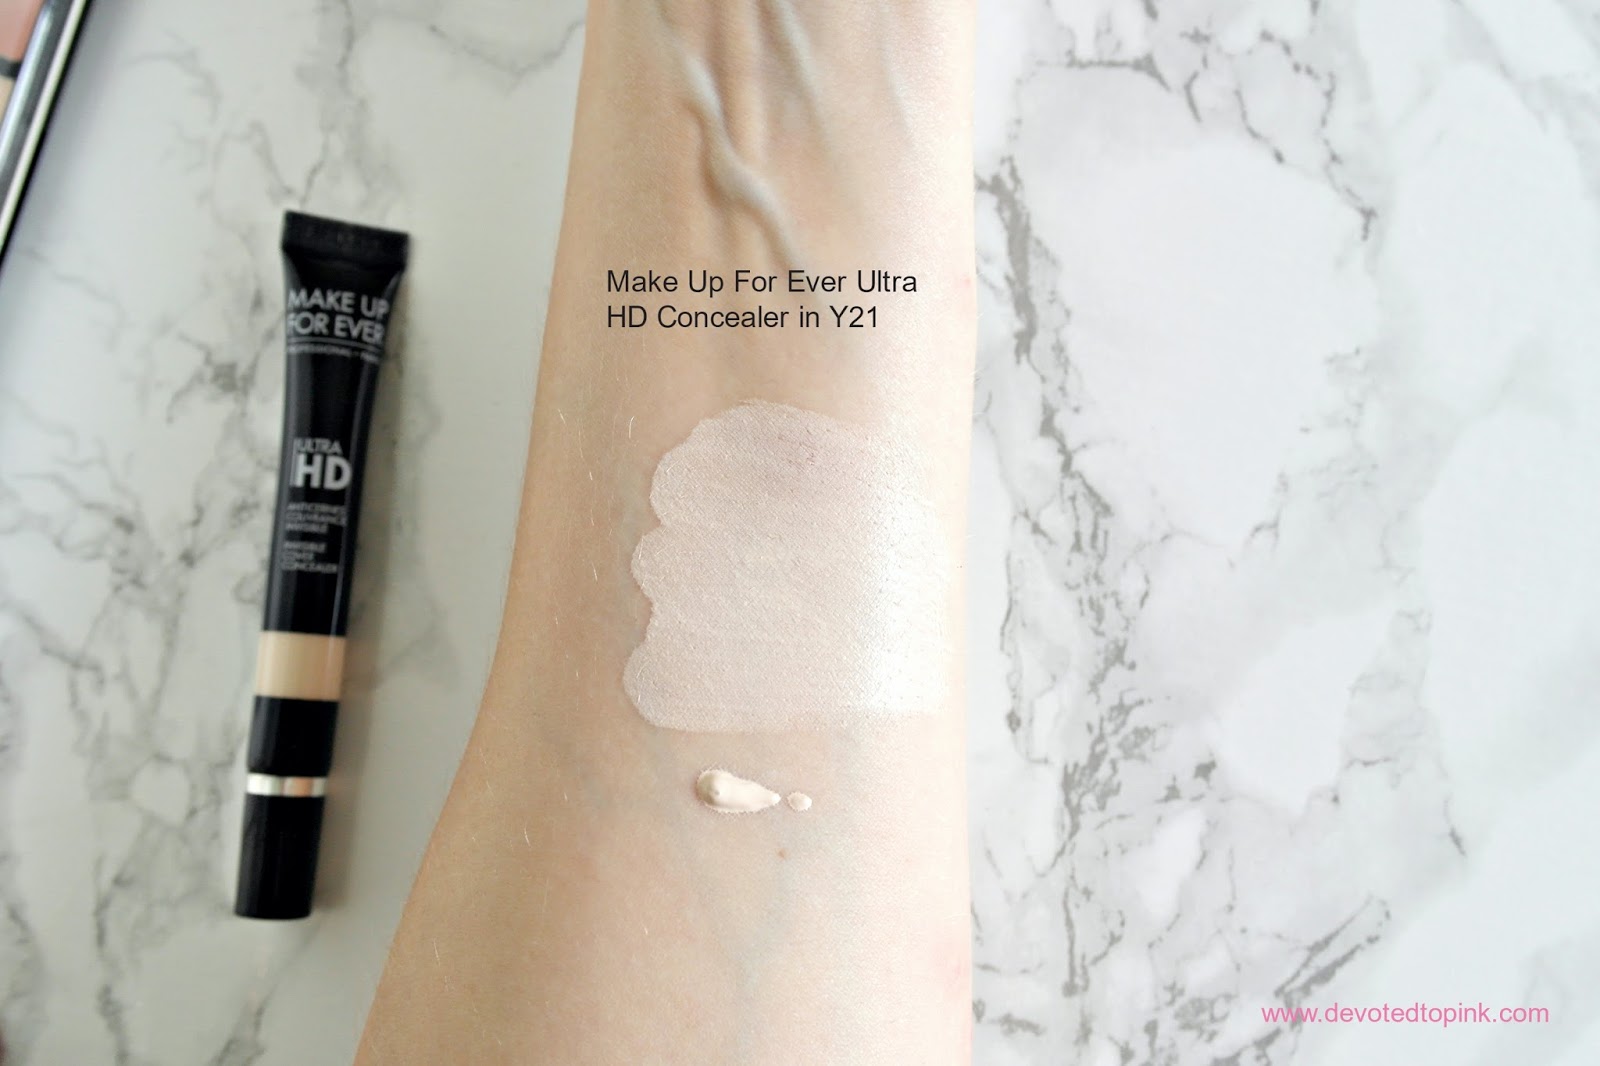 make up for ever, Ultra HD Concealer, review, swatches